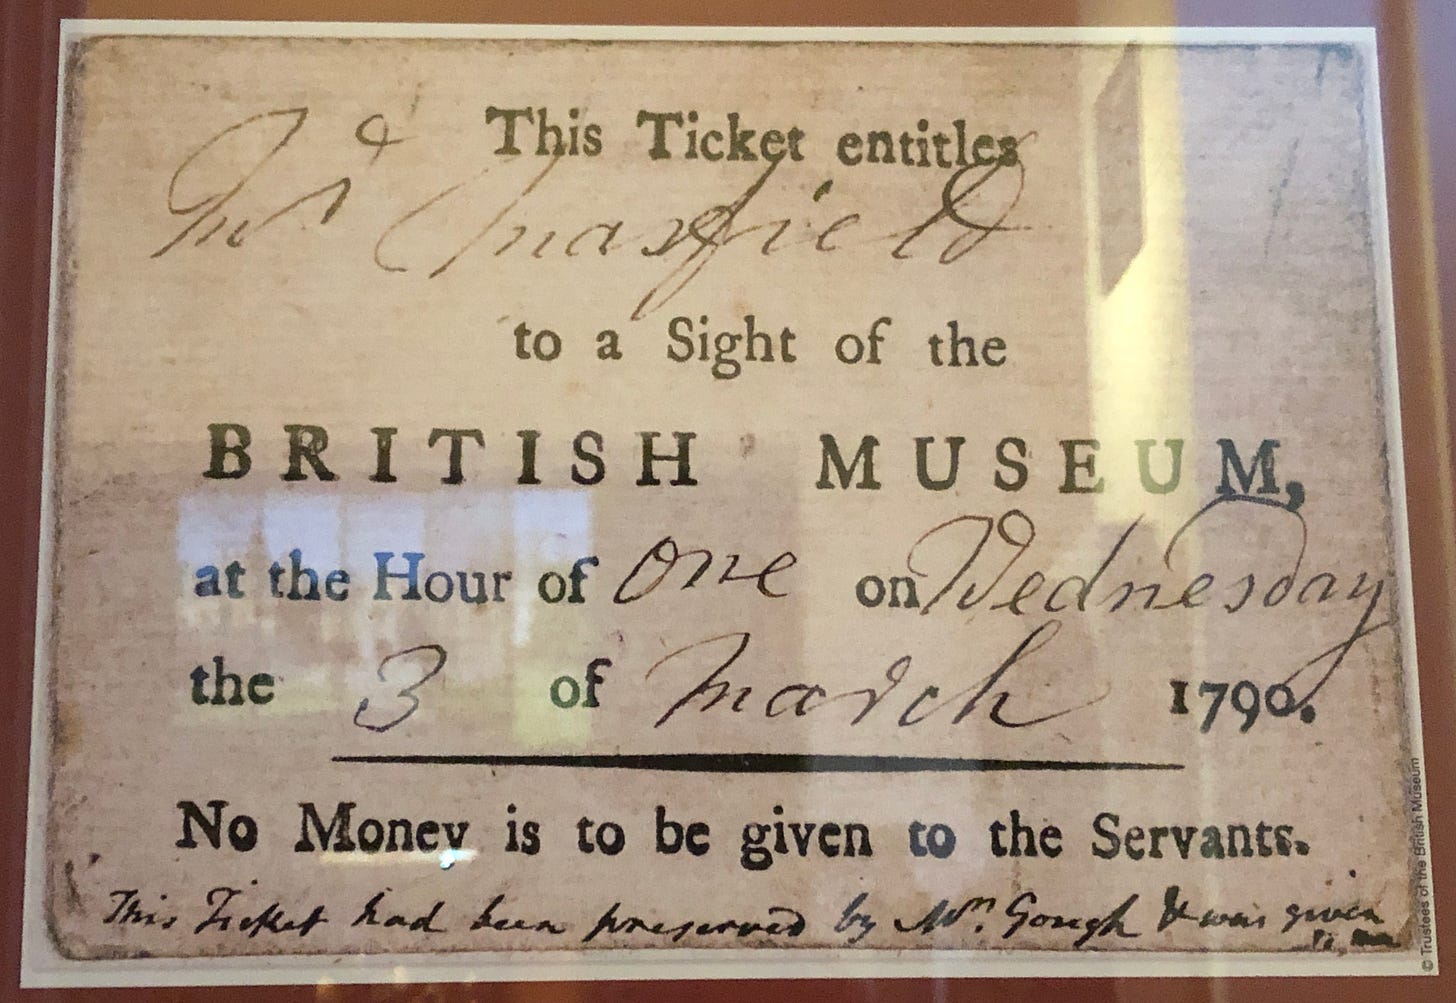 A printed ticket with the text: This ticket entitles [name] to a Sight of the BRITISH MUSEUM, at the hour of One on Wednesday the 3rd of March 1790. No Money is to be given to the Servants.” The name, day, and month are hand-written, as is a note at the bottom describing the ticket’s preservation.